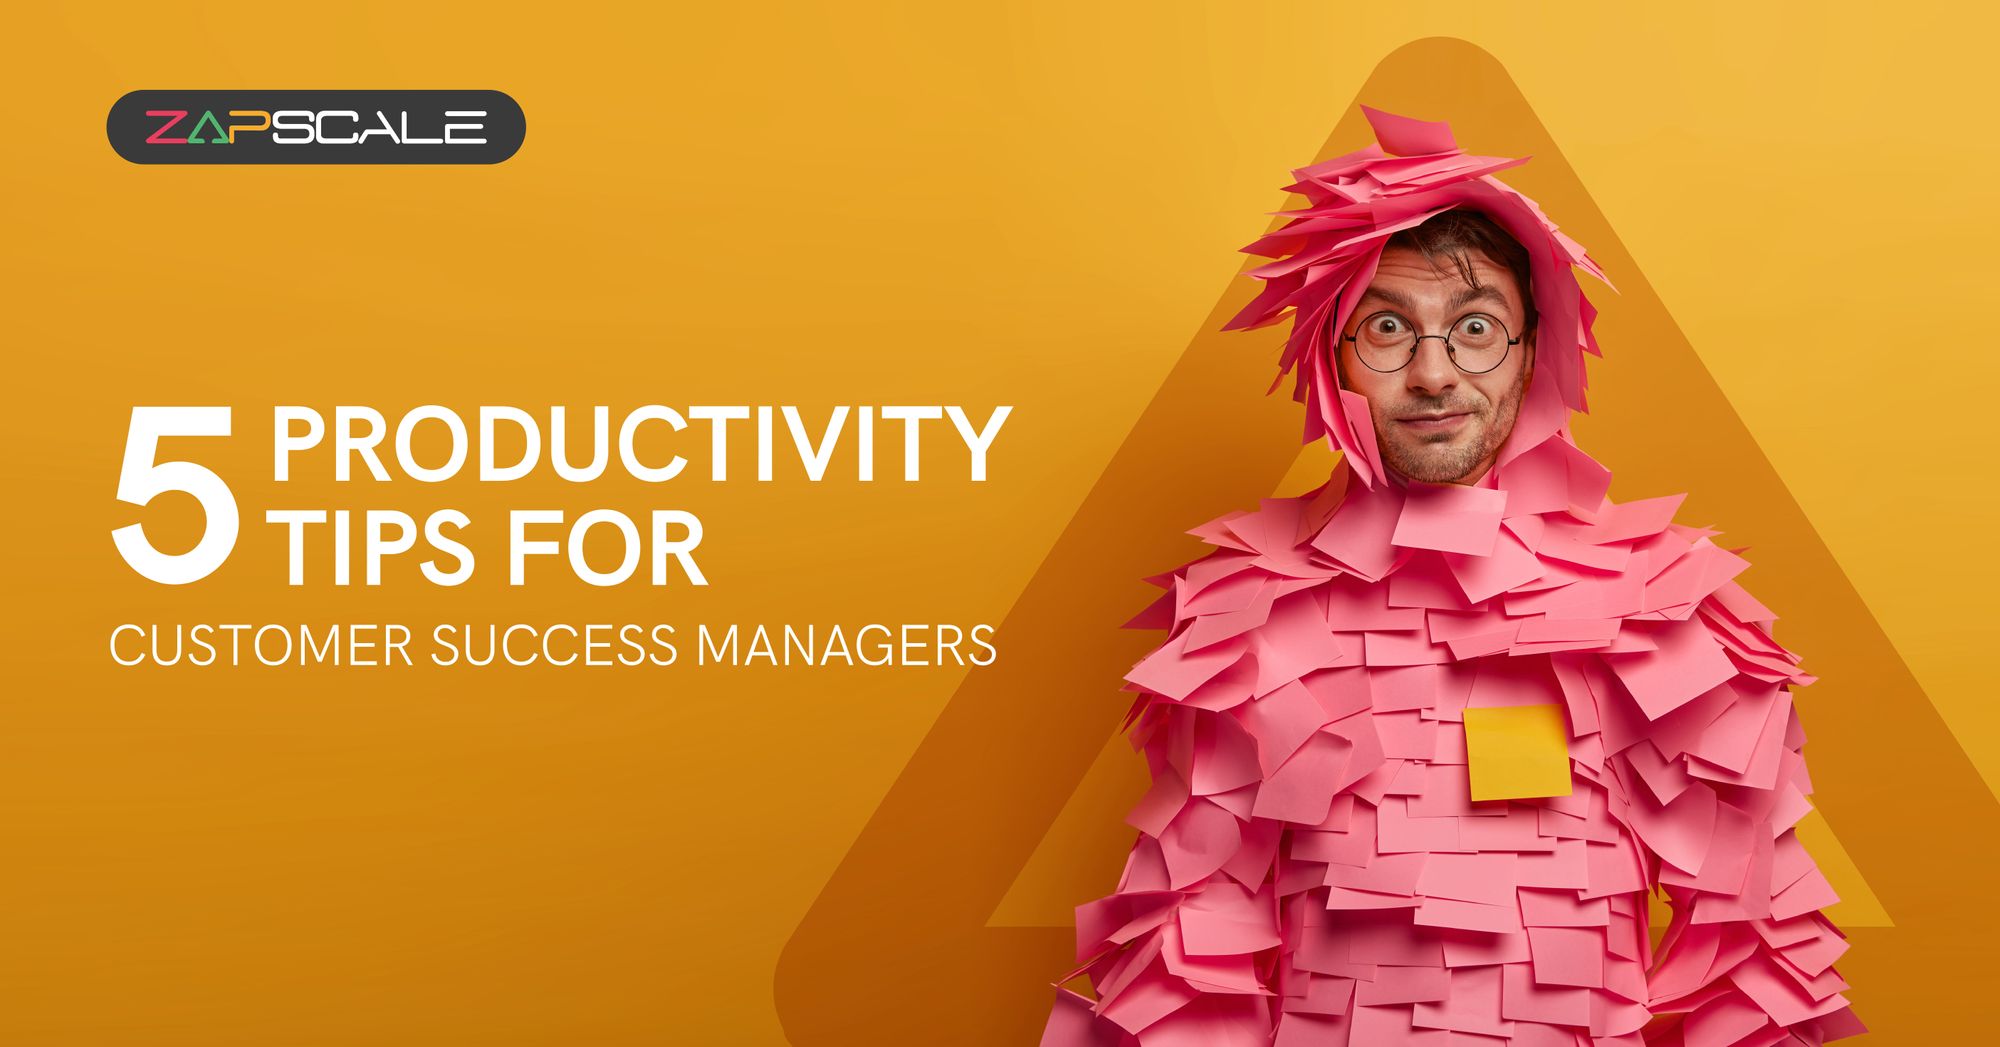 5 Productivity Tips For Ridiculously Busy Customer Success Managers